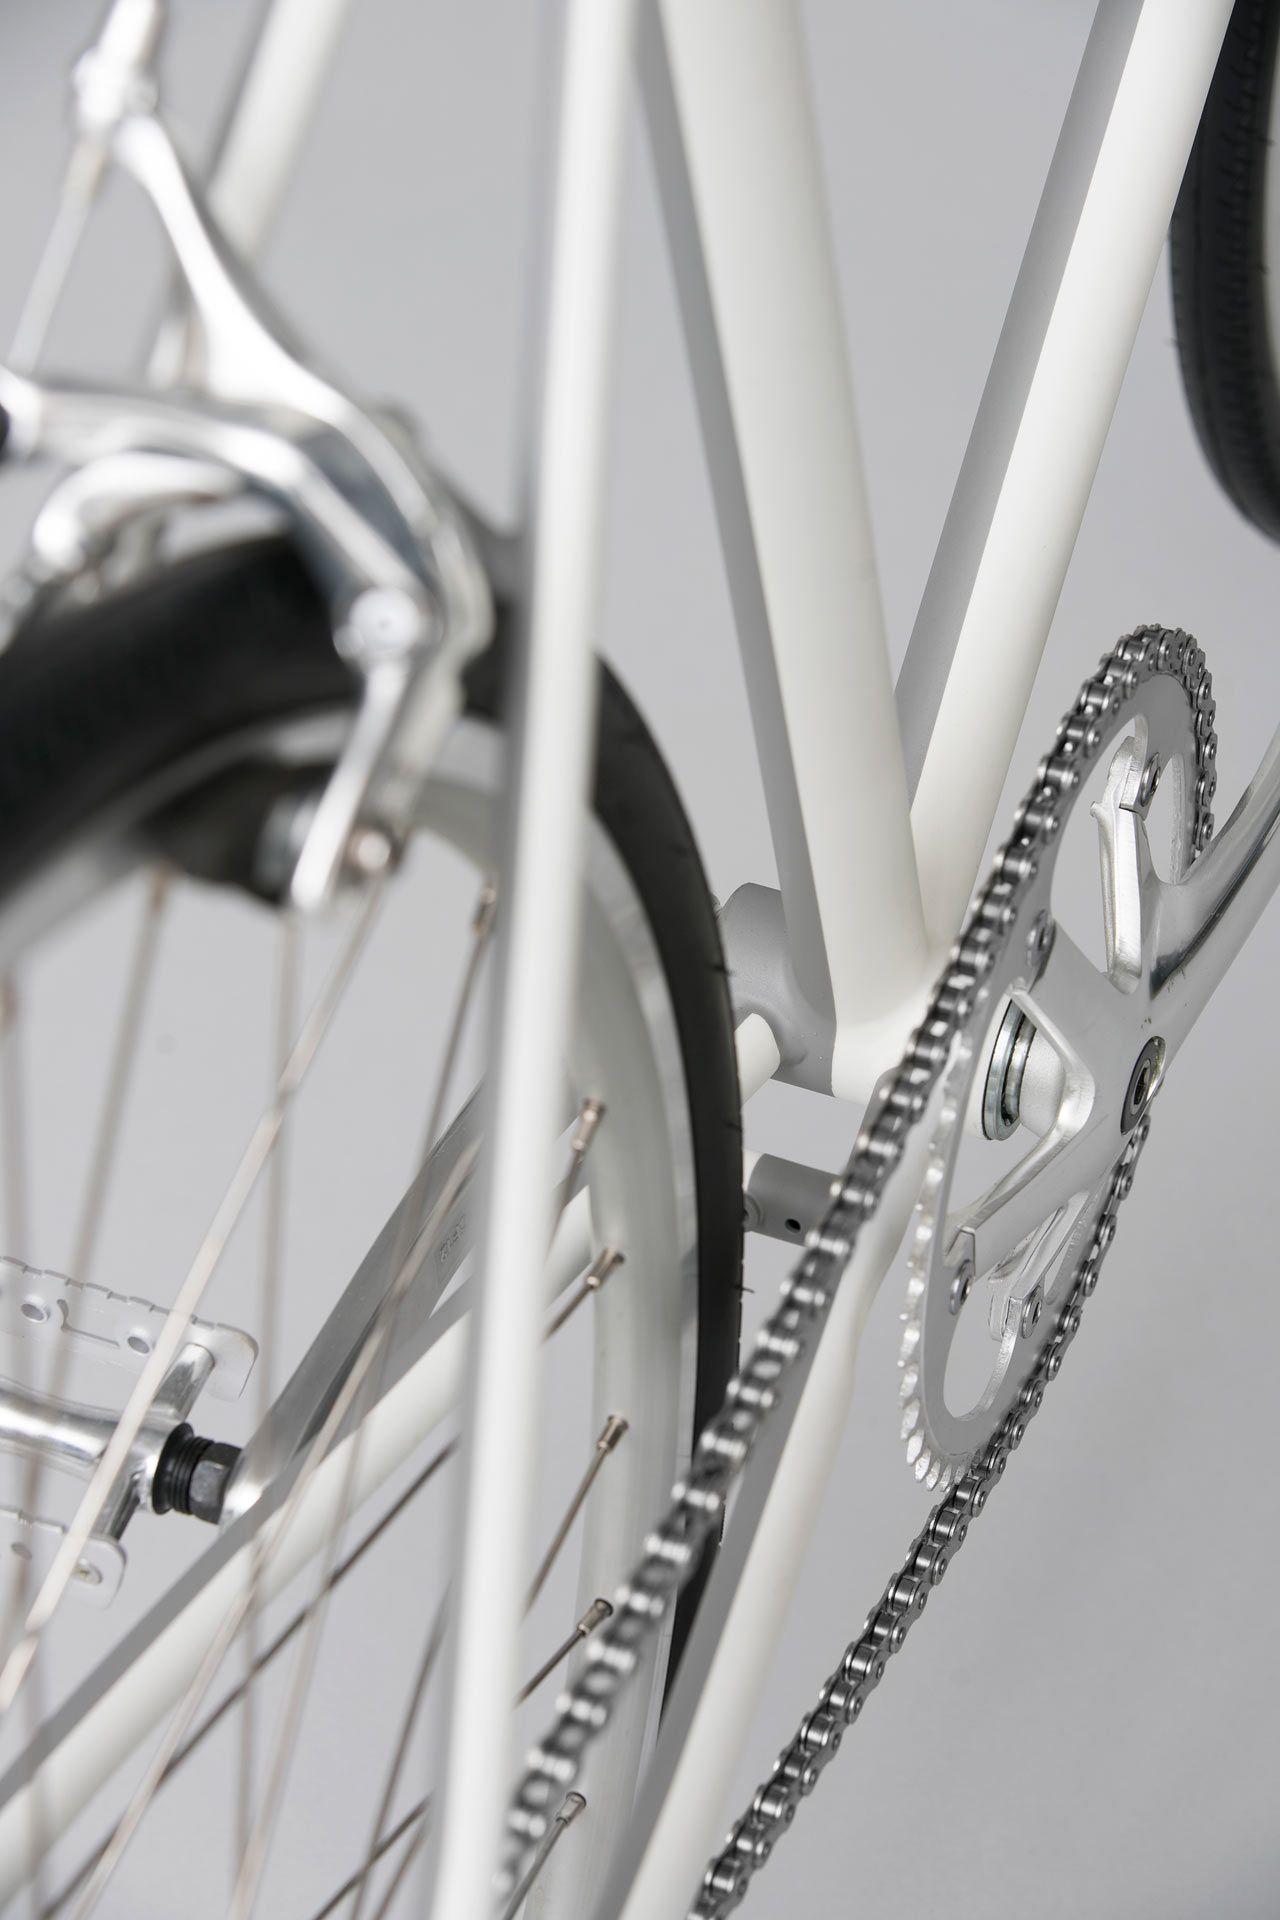 Tokyobike Launches Series Of Limited Edition, Designer